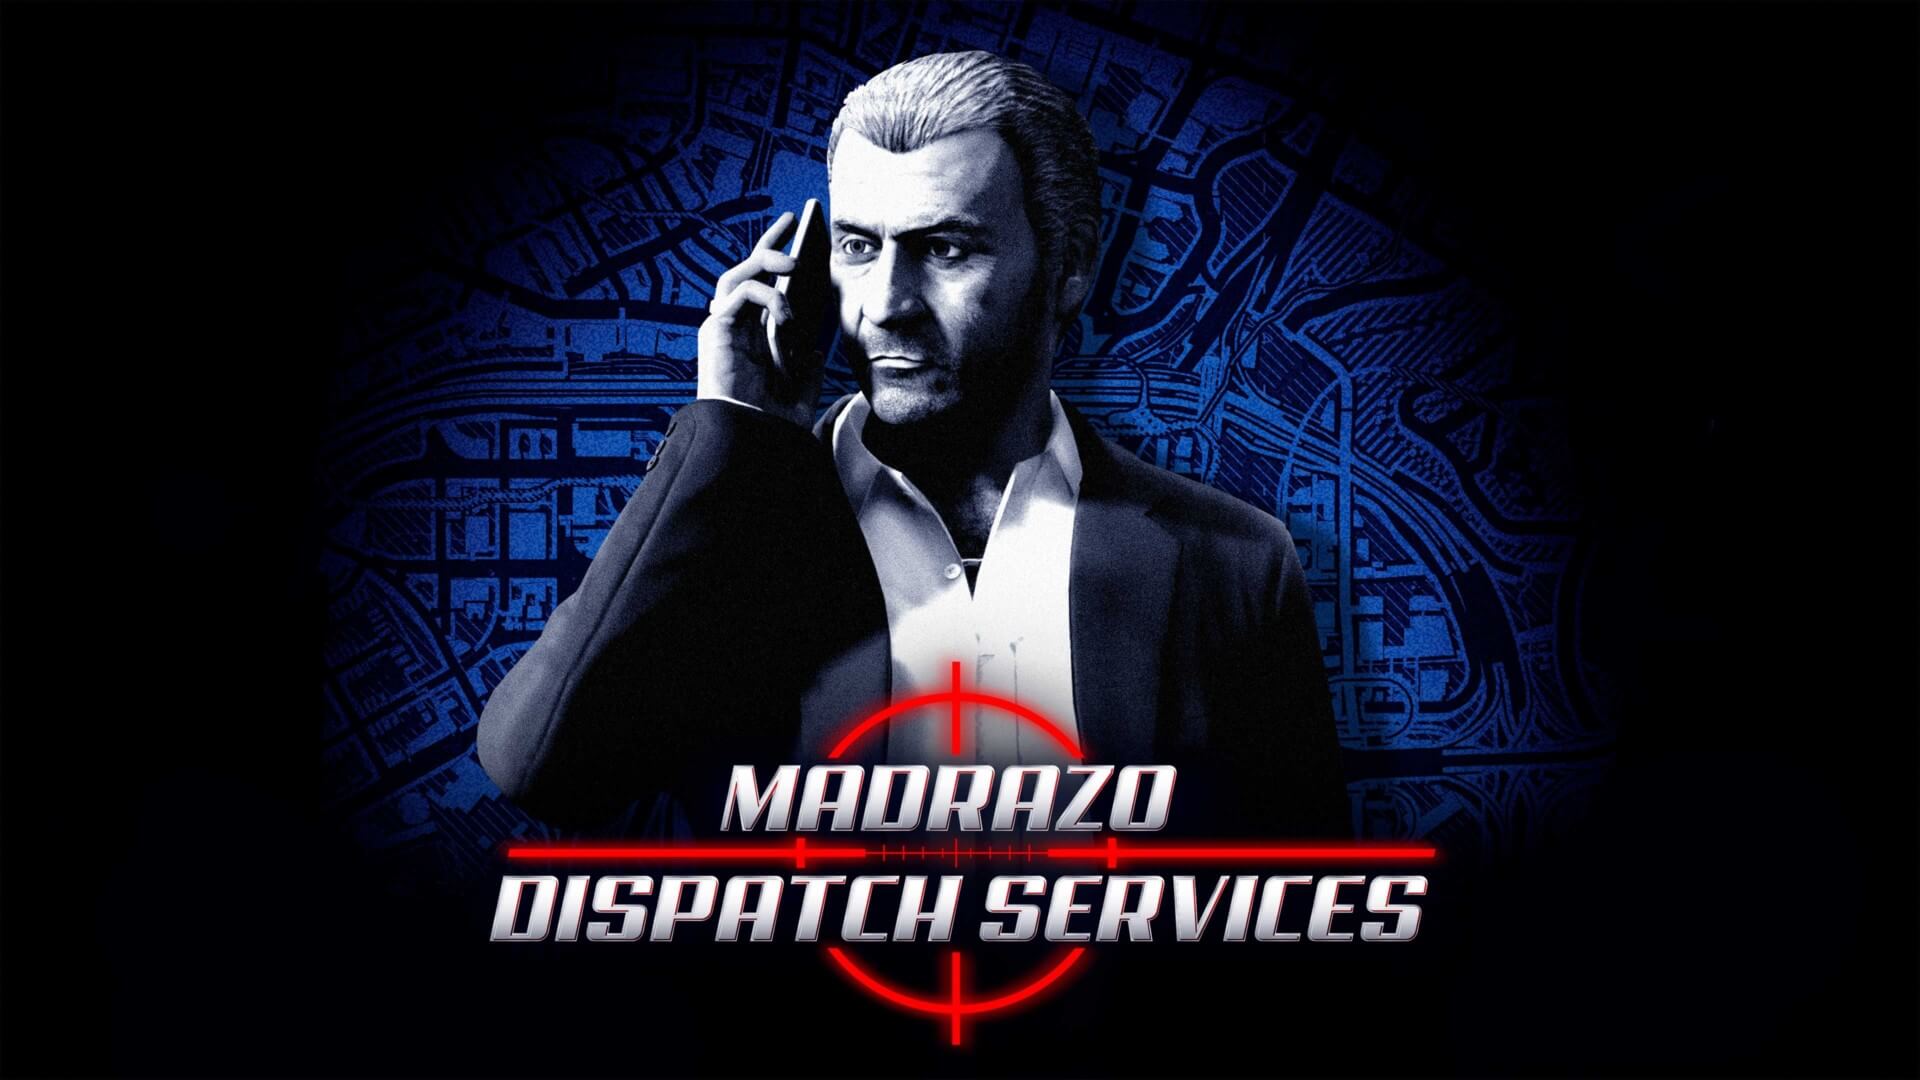 gta online 3 24 2022 madrazo contact missions